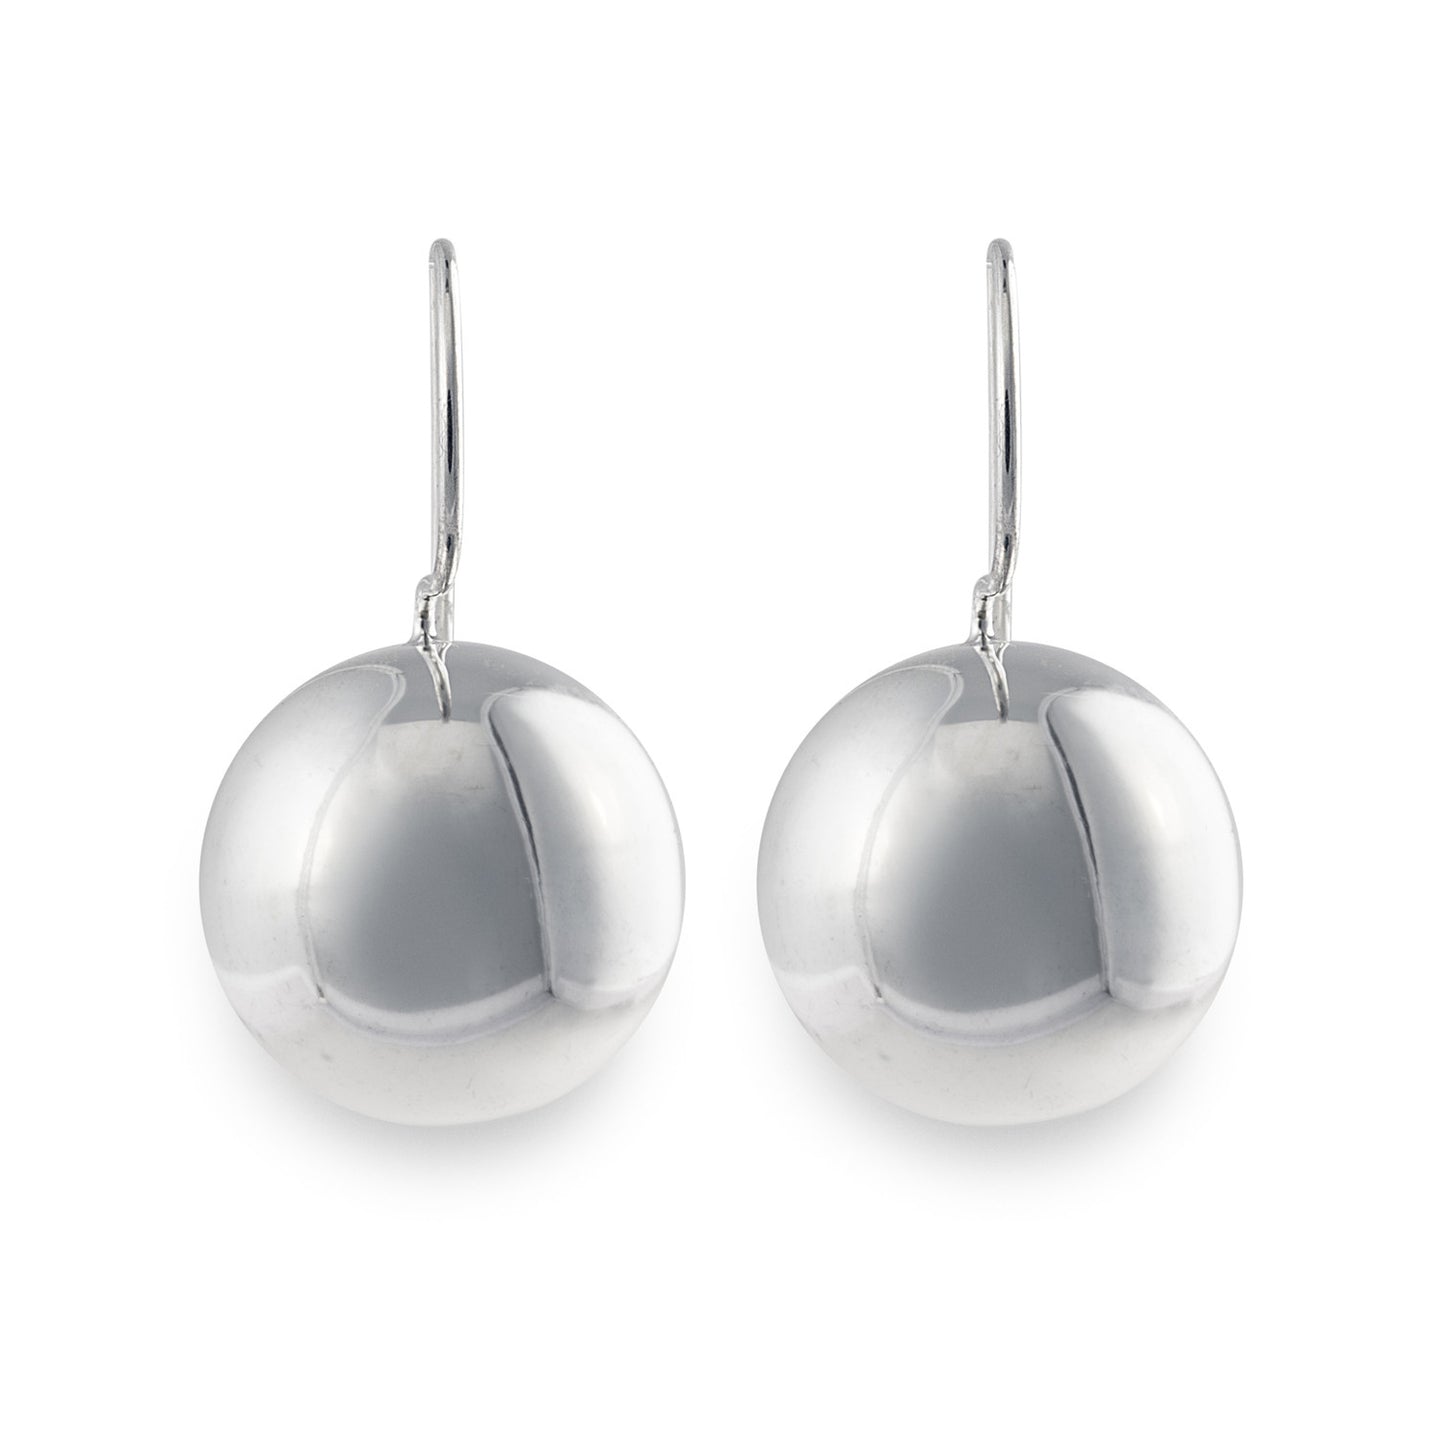 The Grand Villa Drop Earrings feature extra large balls in 925 sterling silver. Size:  18mm ball diameter. Worldwide Shipping. Jewellery by Bellagio & Co